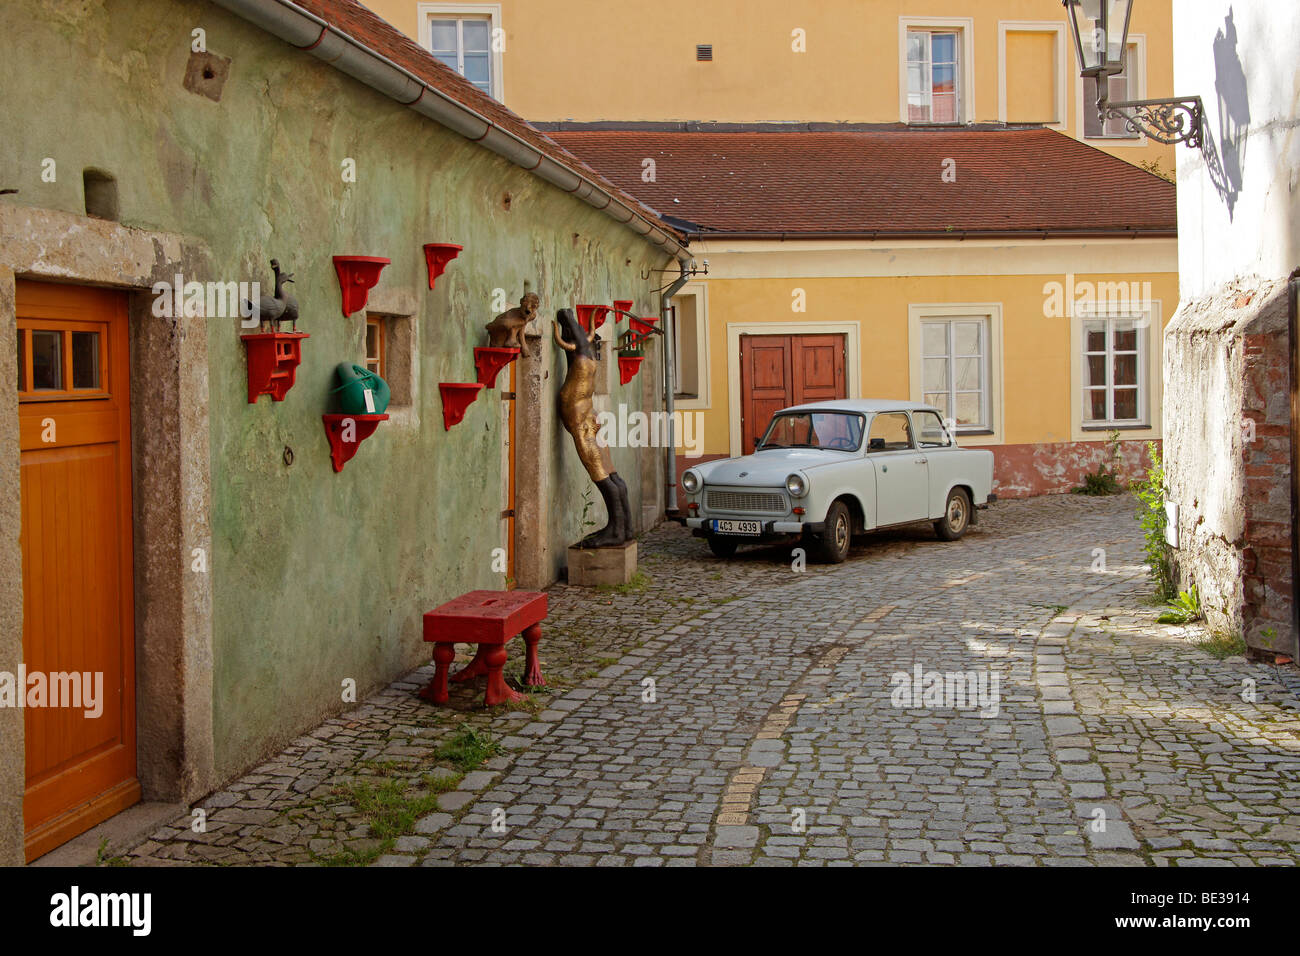 Typical GDR-car Trabant parking in an alleyway in the historic centre of Český Krumlov, Czech Republic, Europe Stock Photo